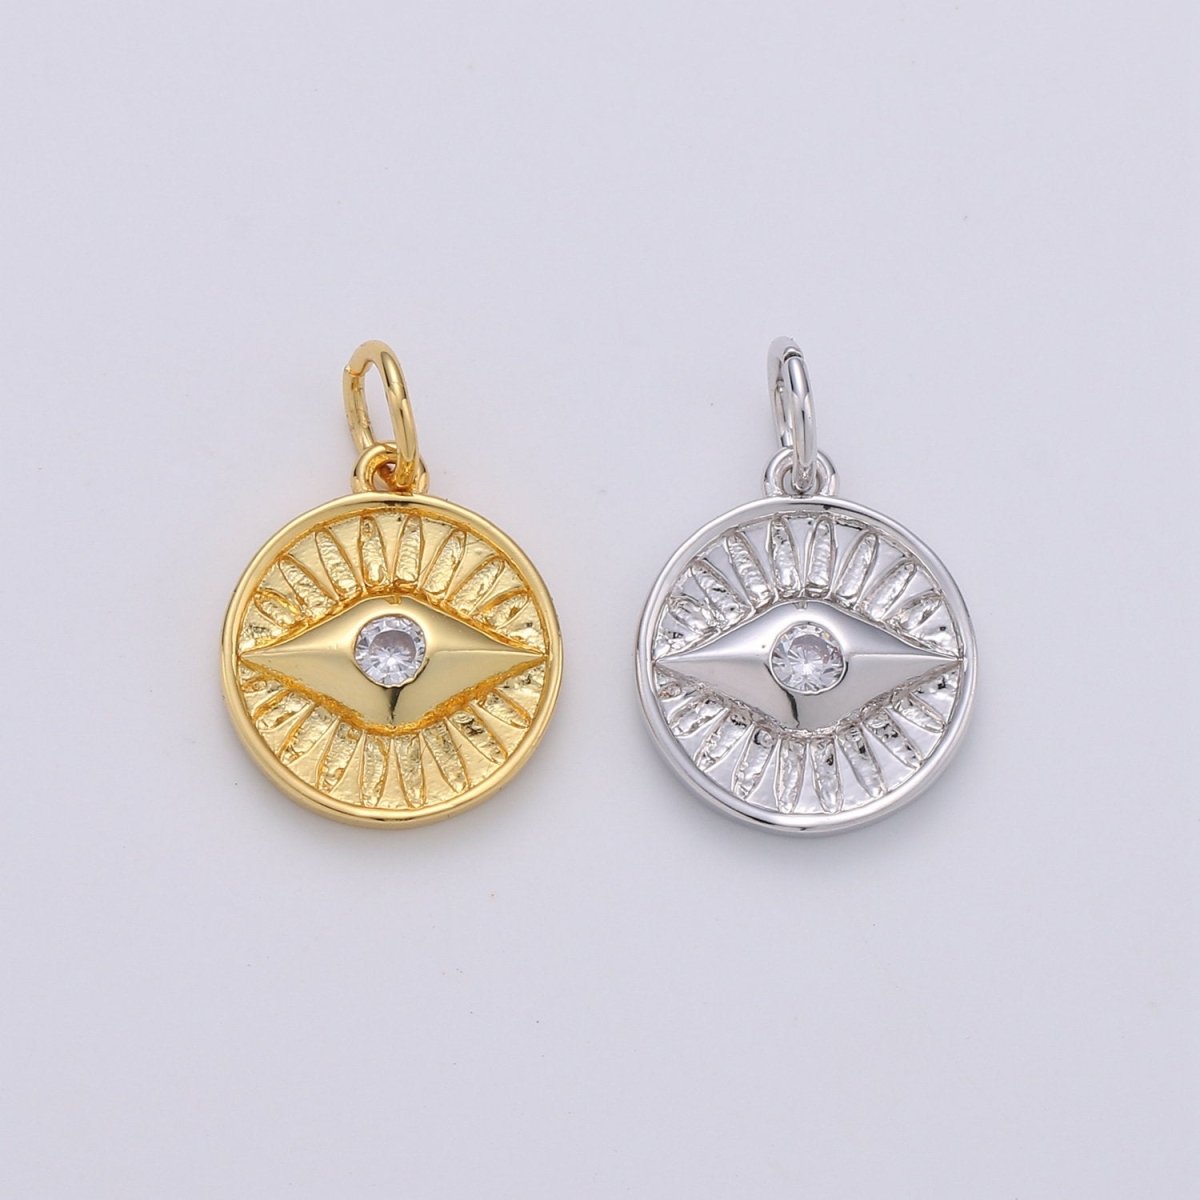 Dainty 14k Gold Filled Charm Coin Evil Eye Pendant Charm for Bracelet Necklace Earring Component for Jewelry Making D-279 D-280 - DLUXCA